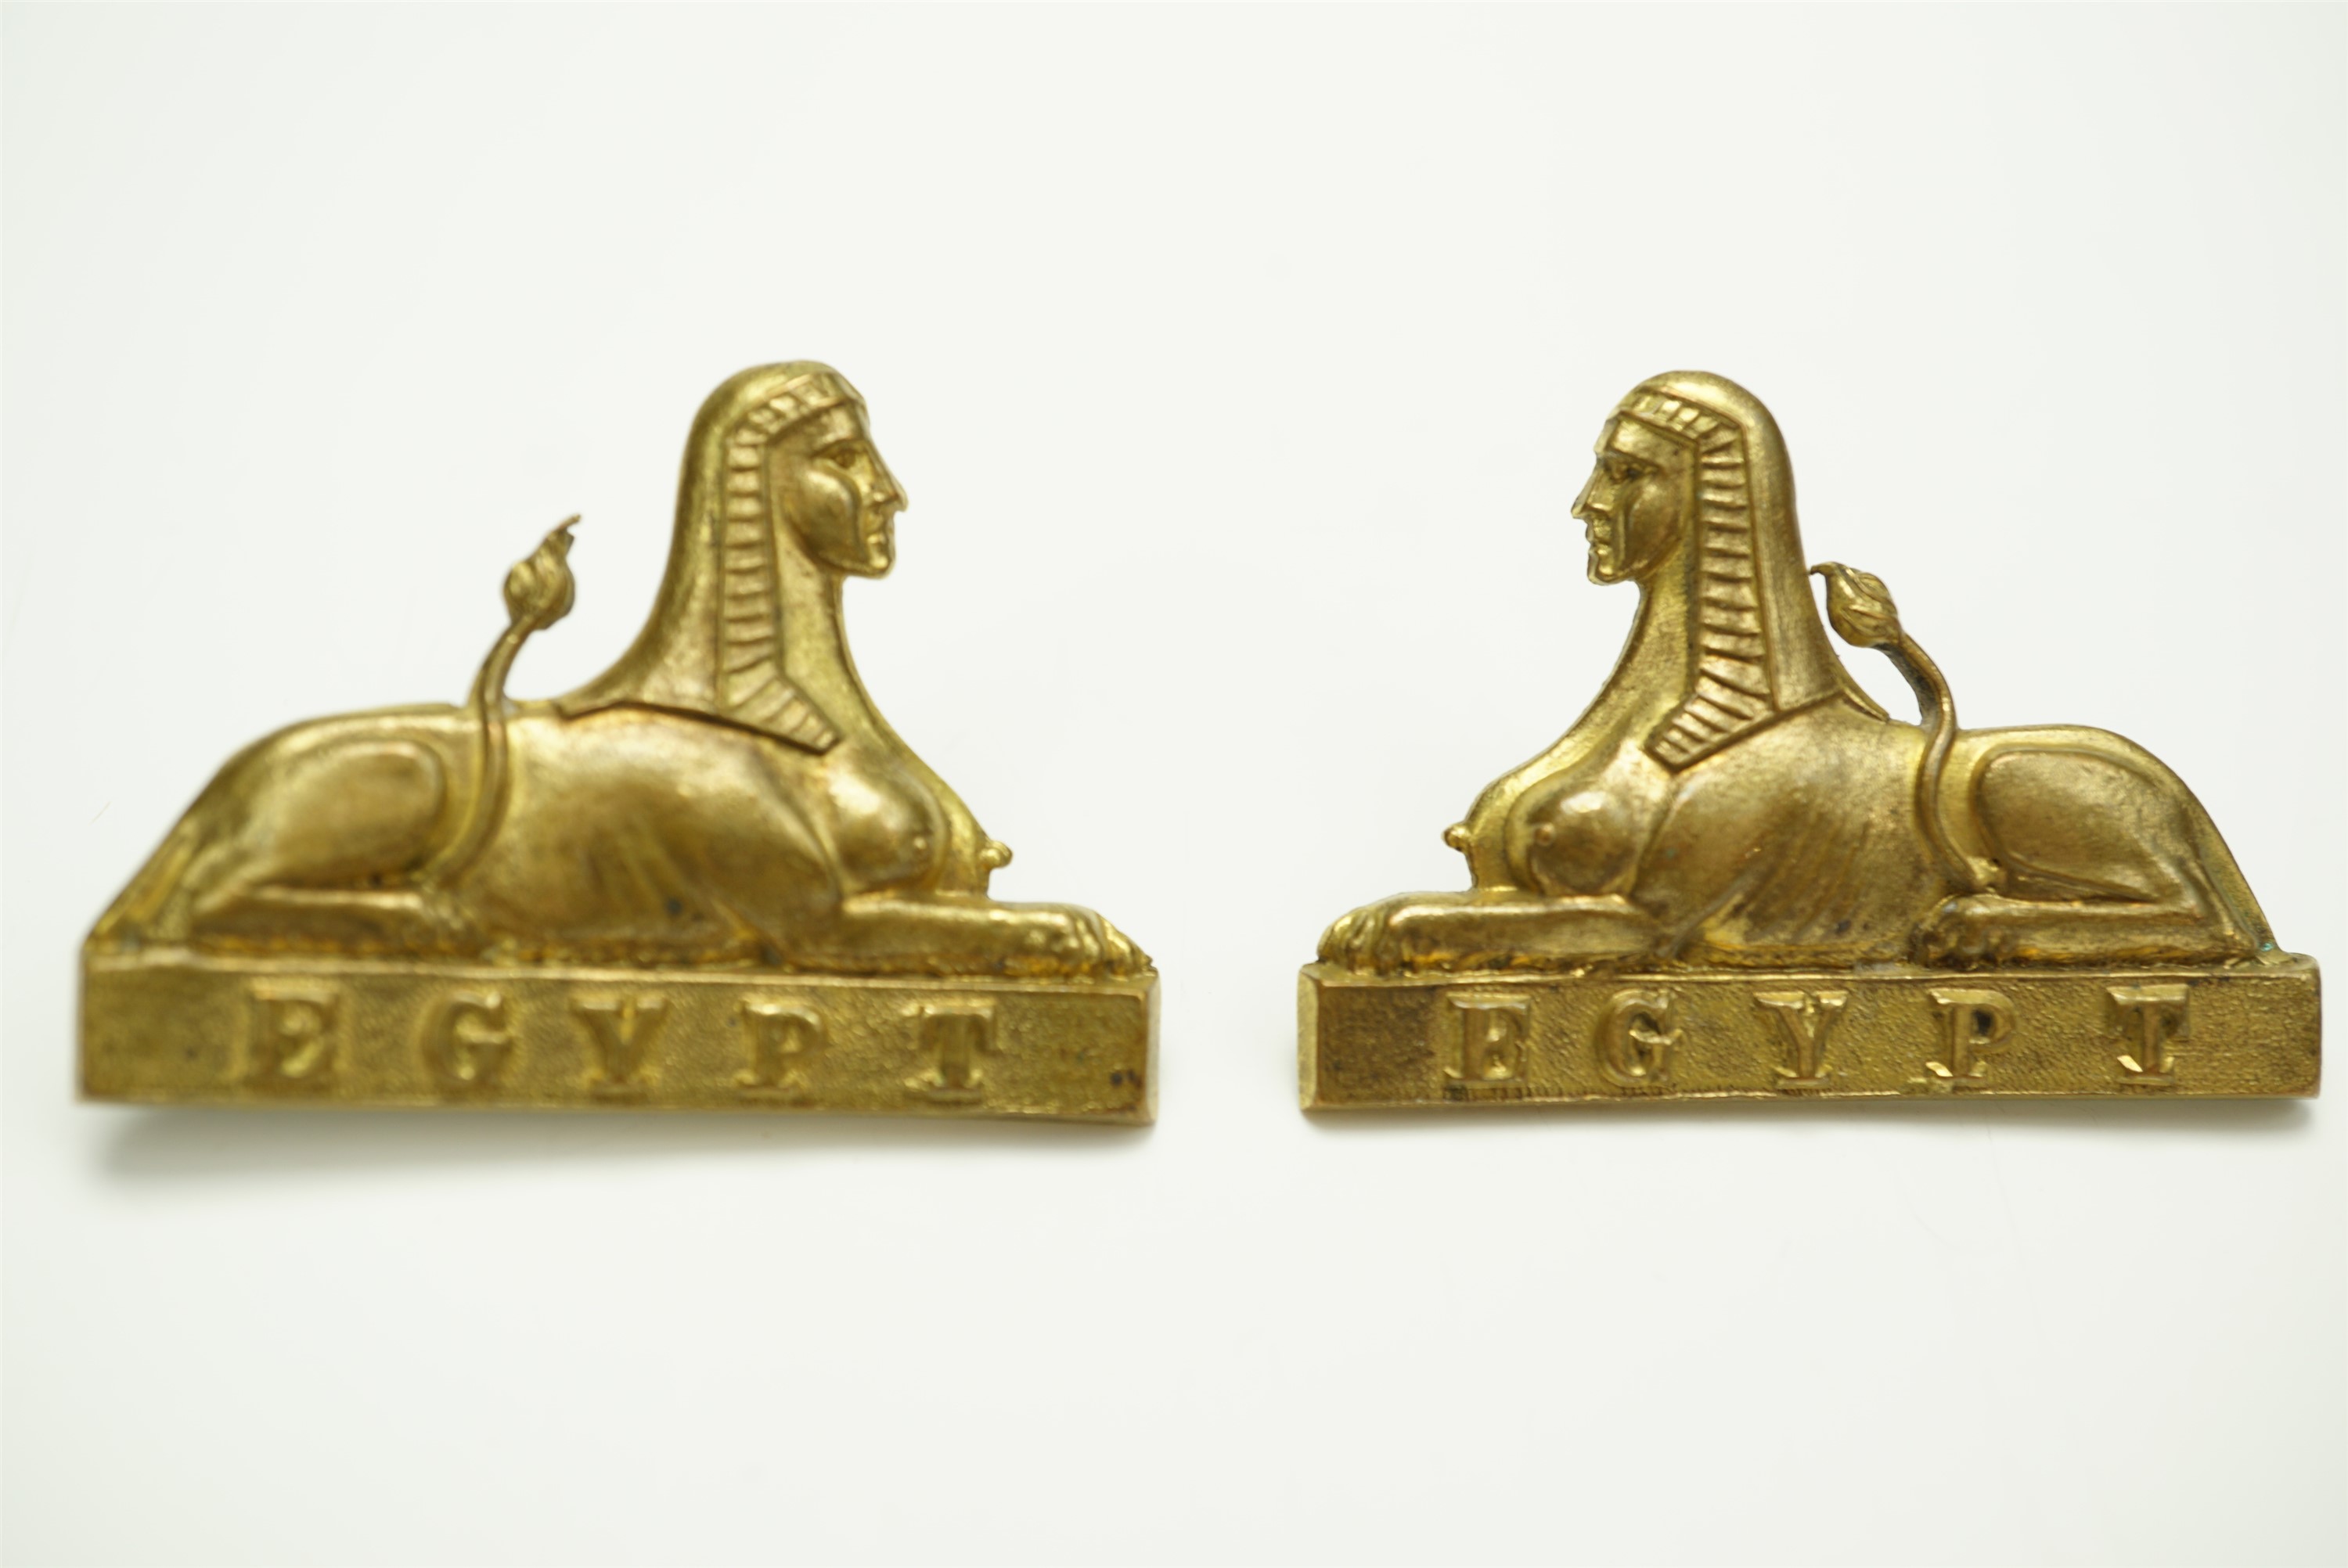 A pair of 24th (2nd Warwickshire) Regiment of Foot collar badges, 32 mm x 24 mm [A company of the